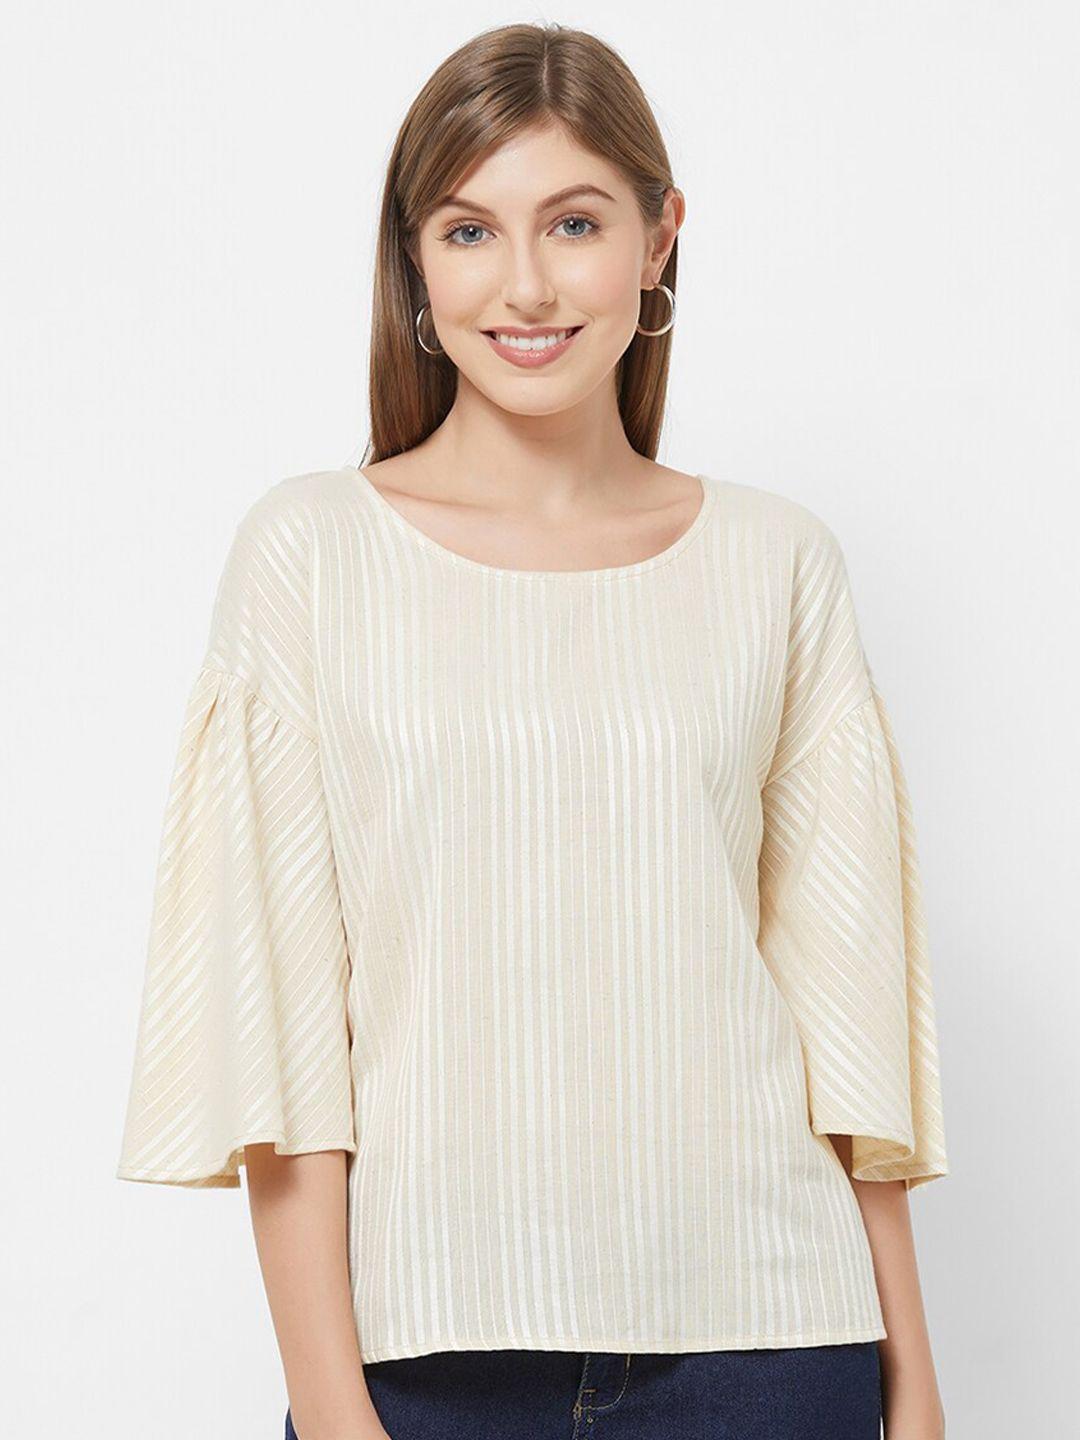 fusion-beats-striped-bell-sleeve-cotton-top